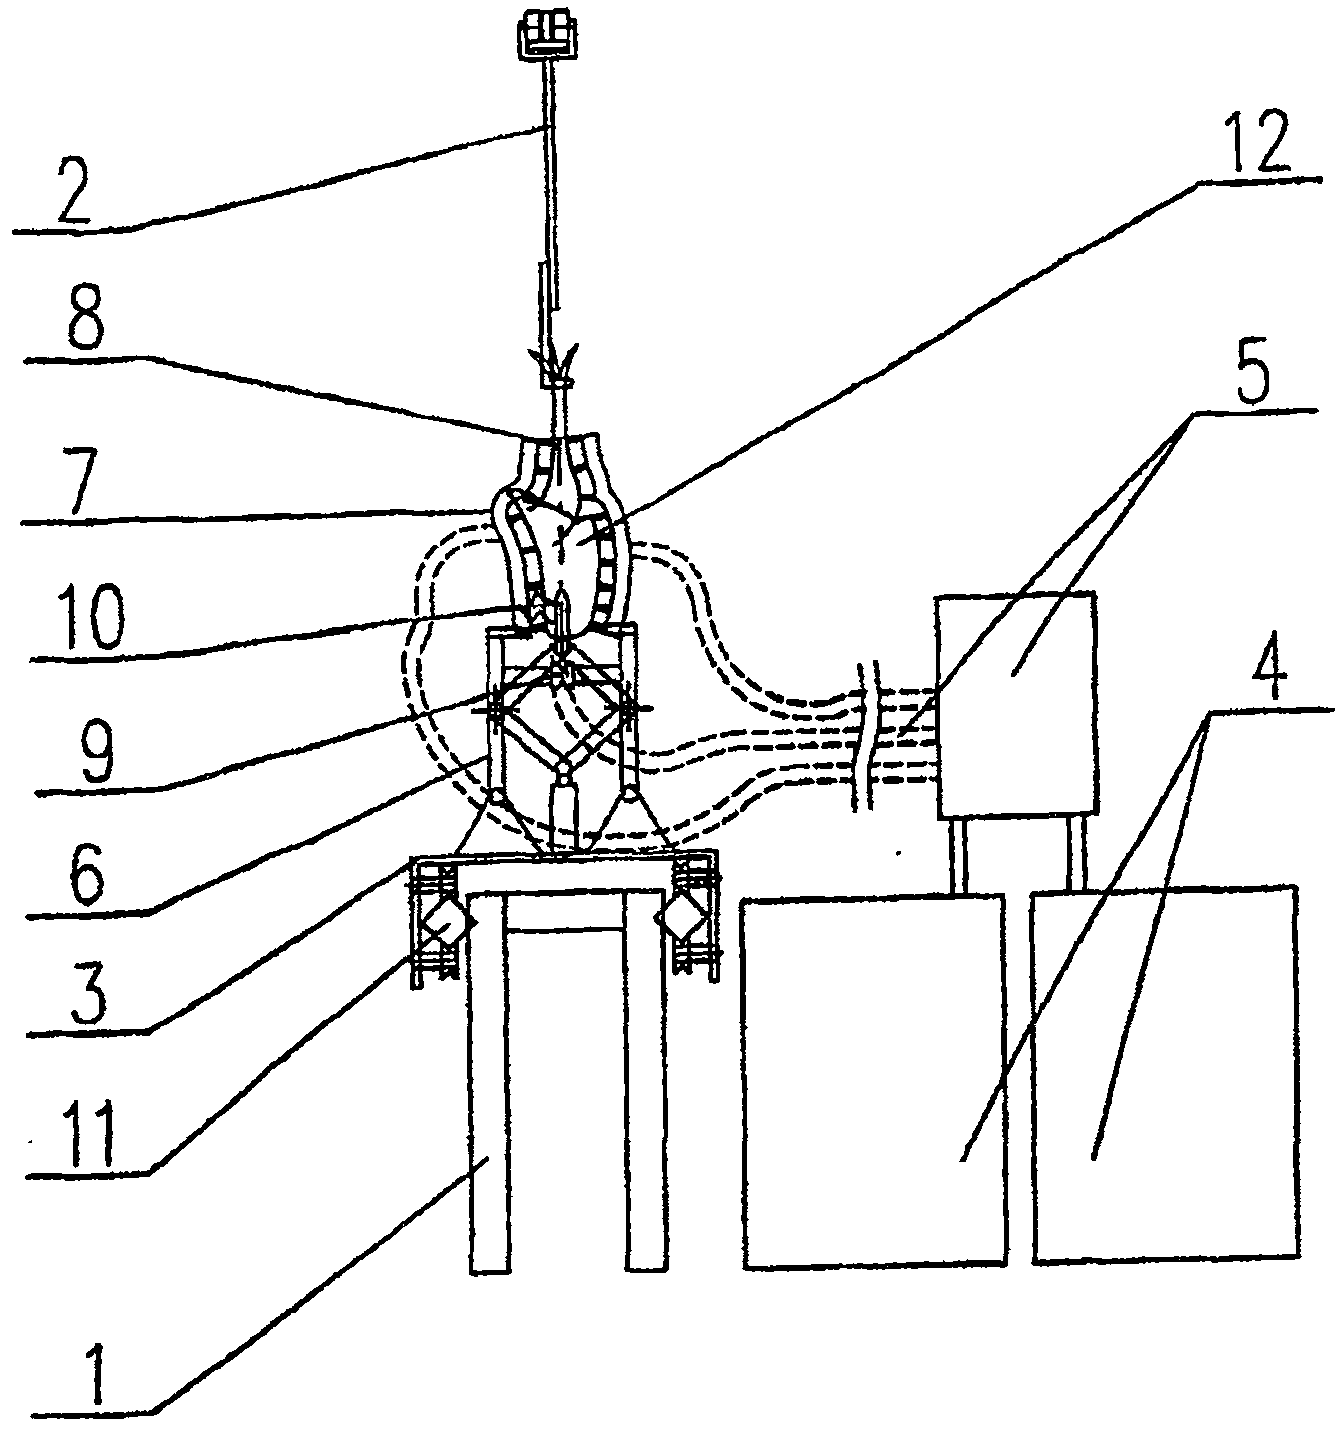 Device and method for introducing liquids into meat